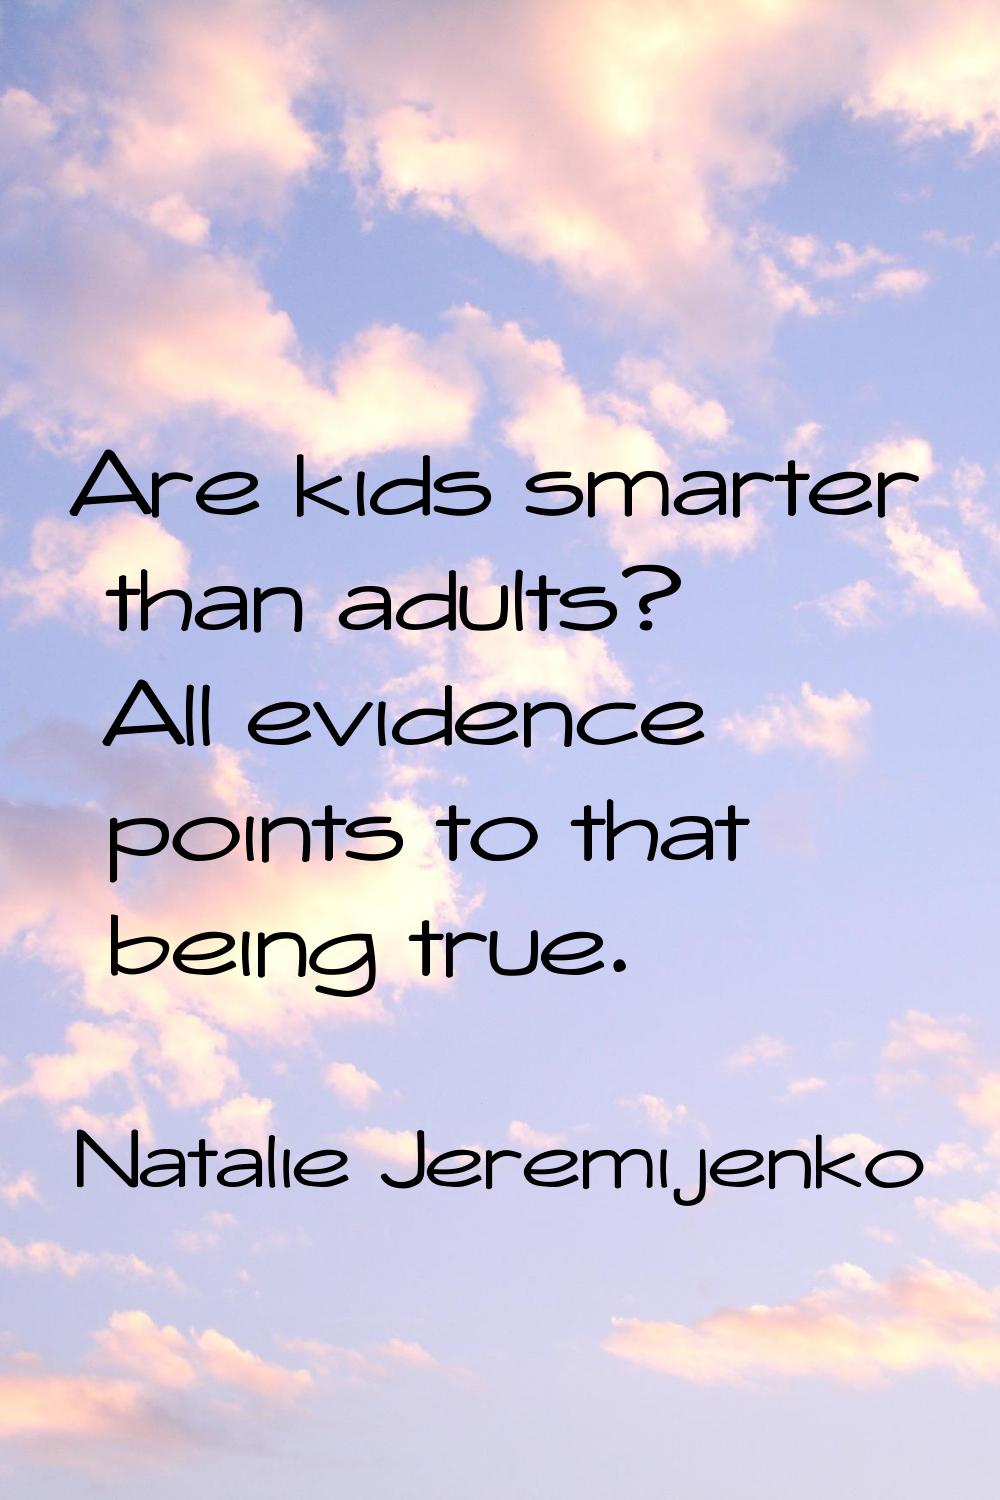 Are kids smarter than adults? All evidence points to that being true.